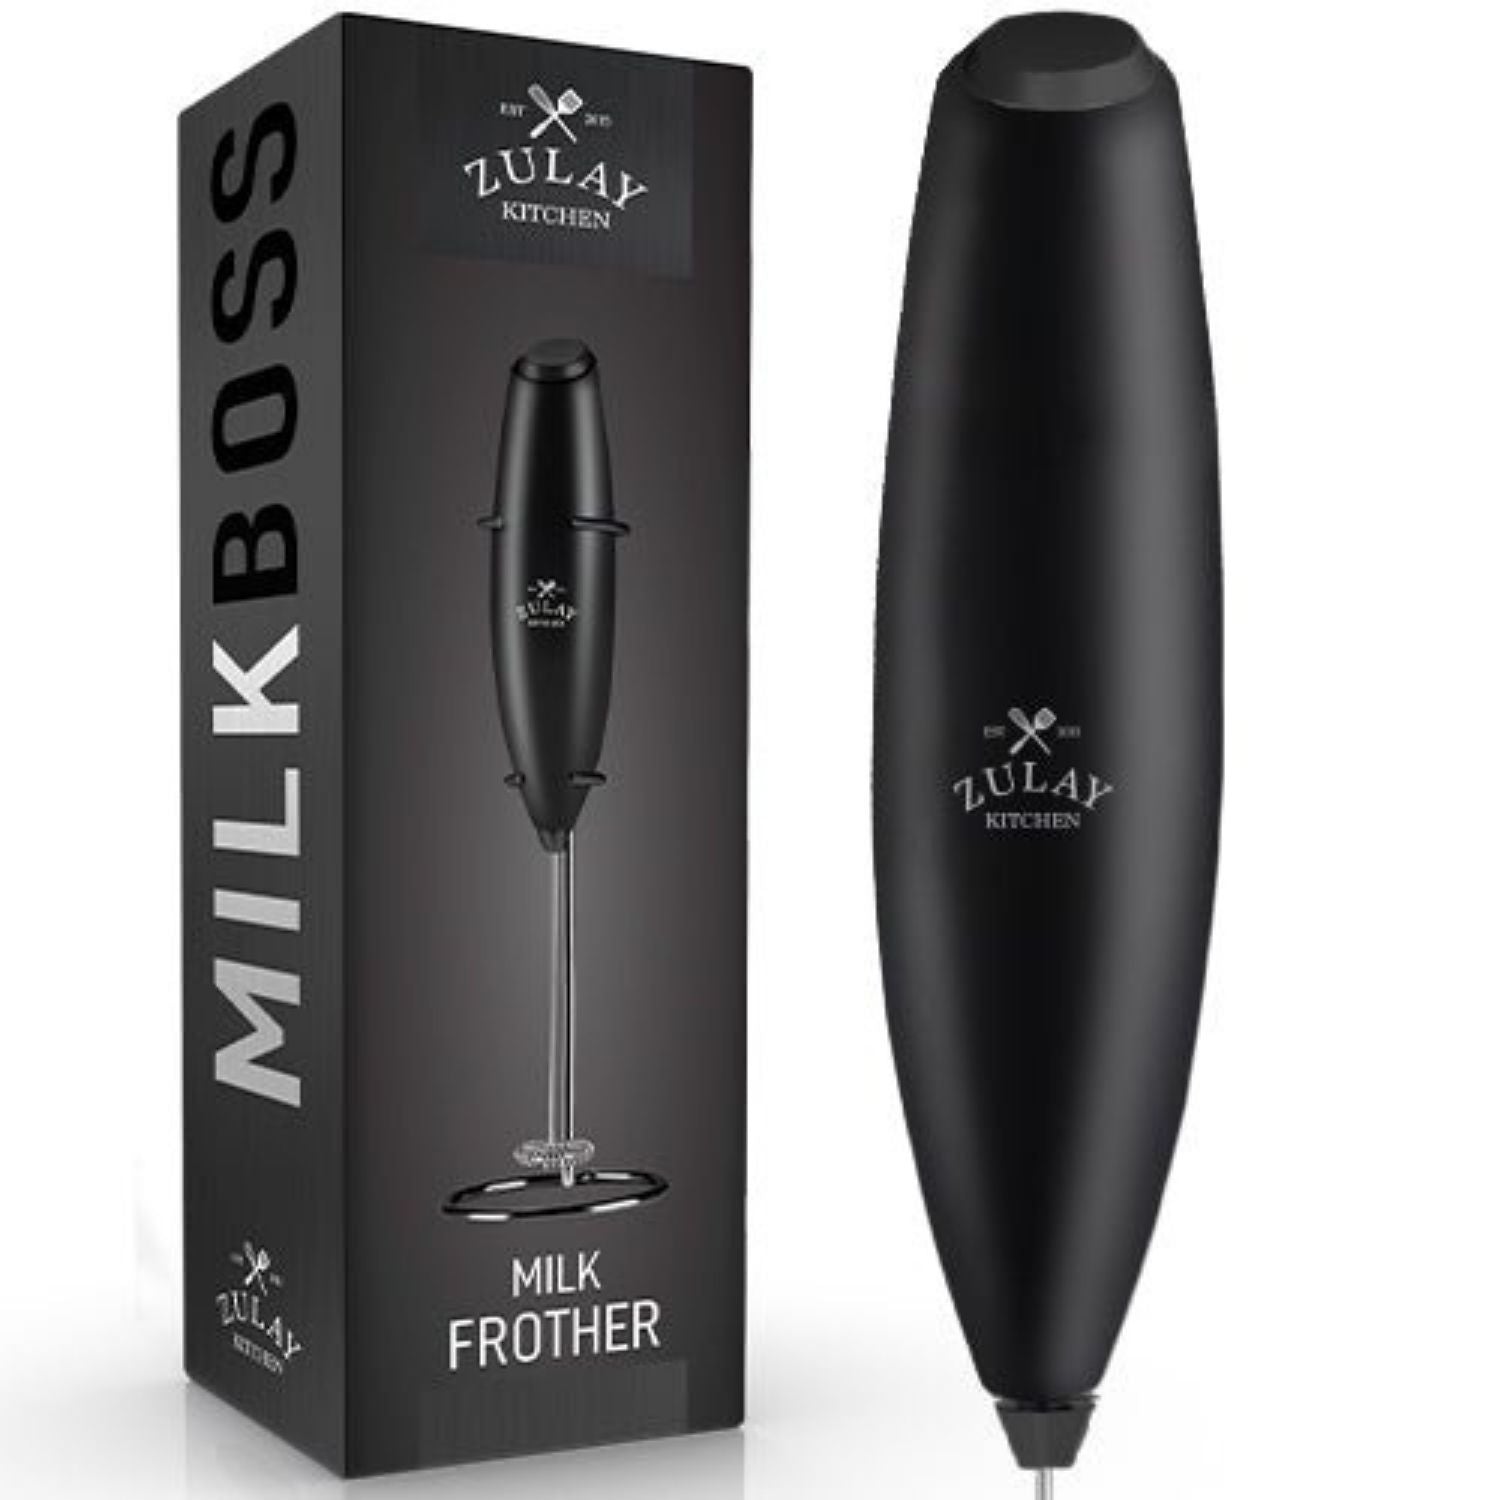 Zulay Kitchen Milk Boss Milk Frother with Stand Black - Black